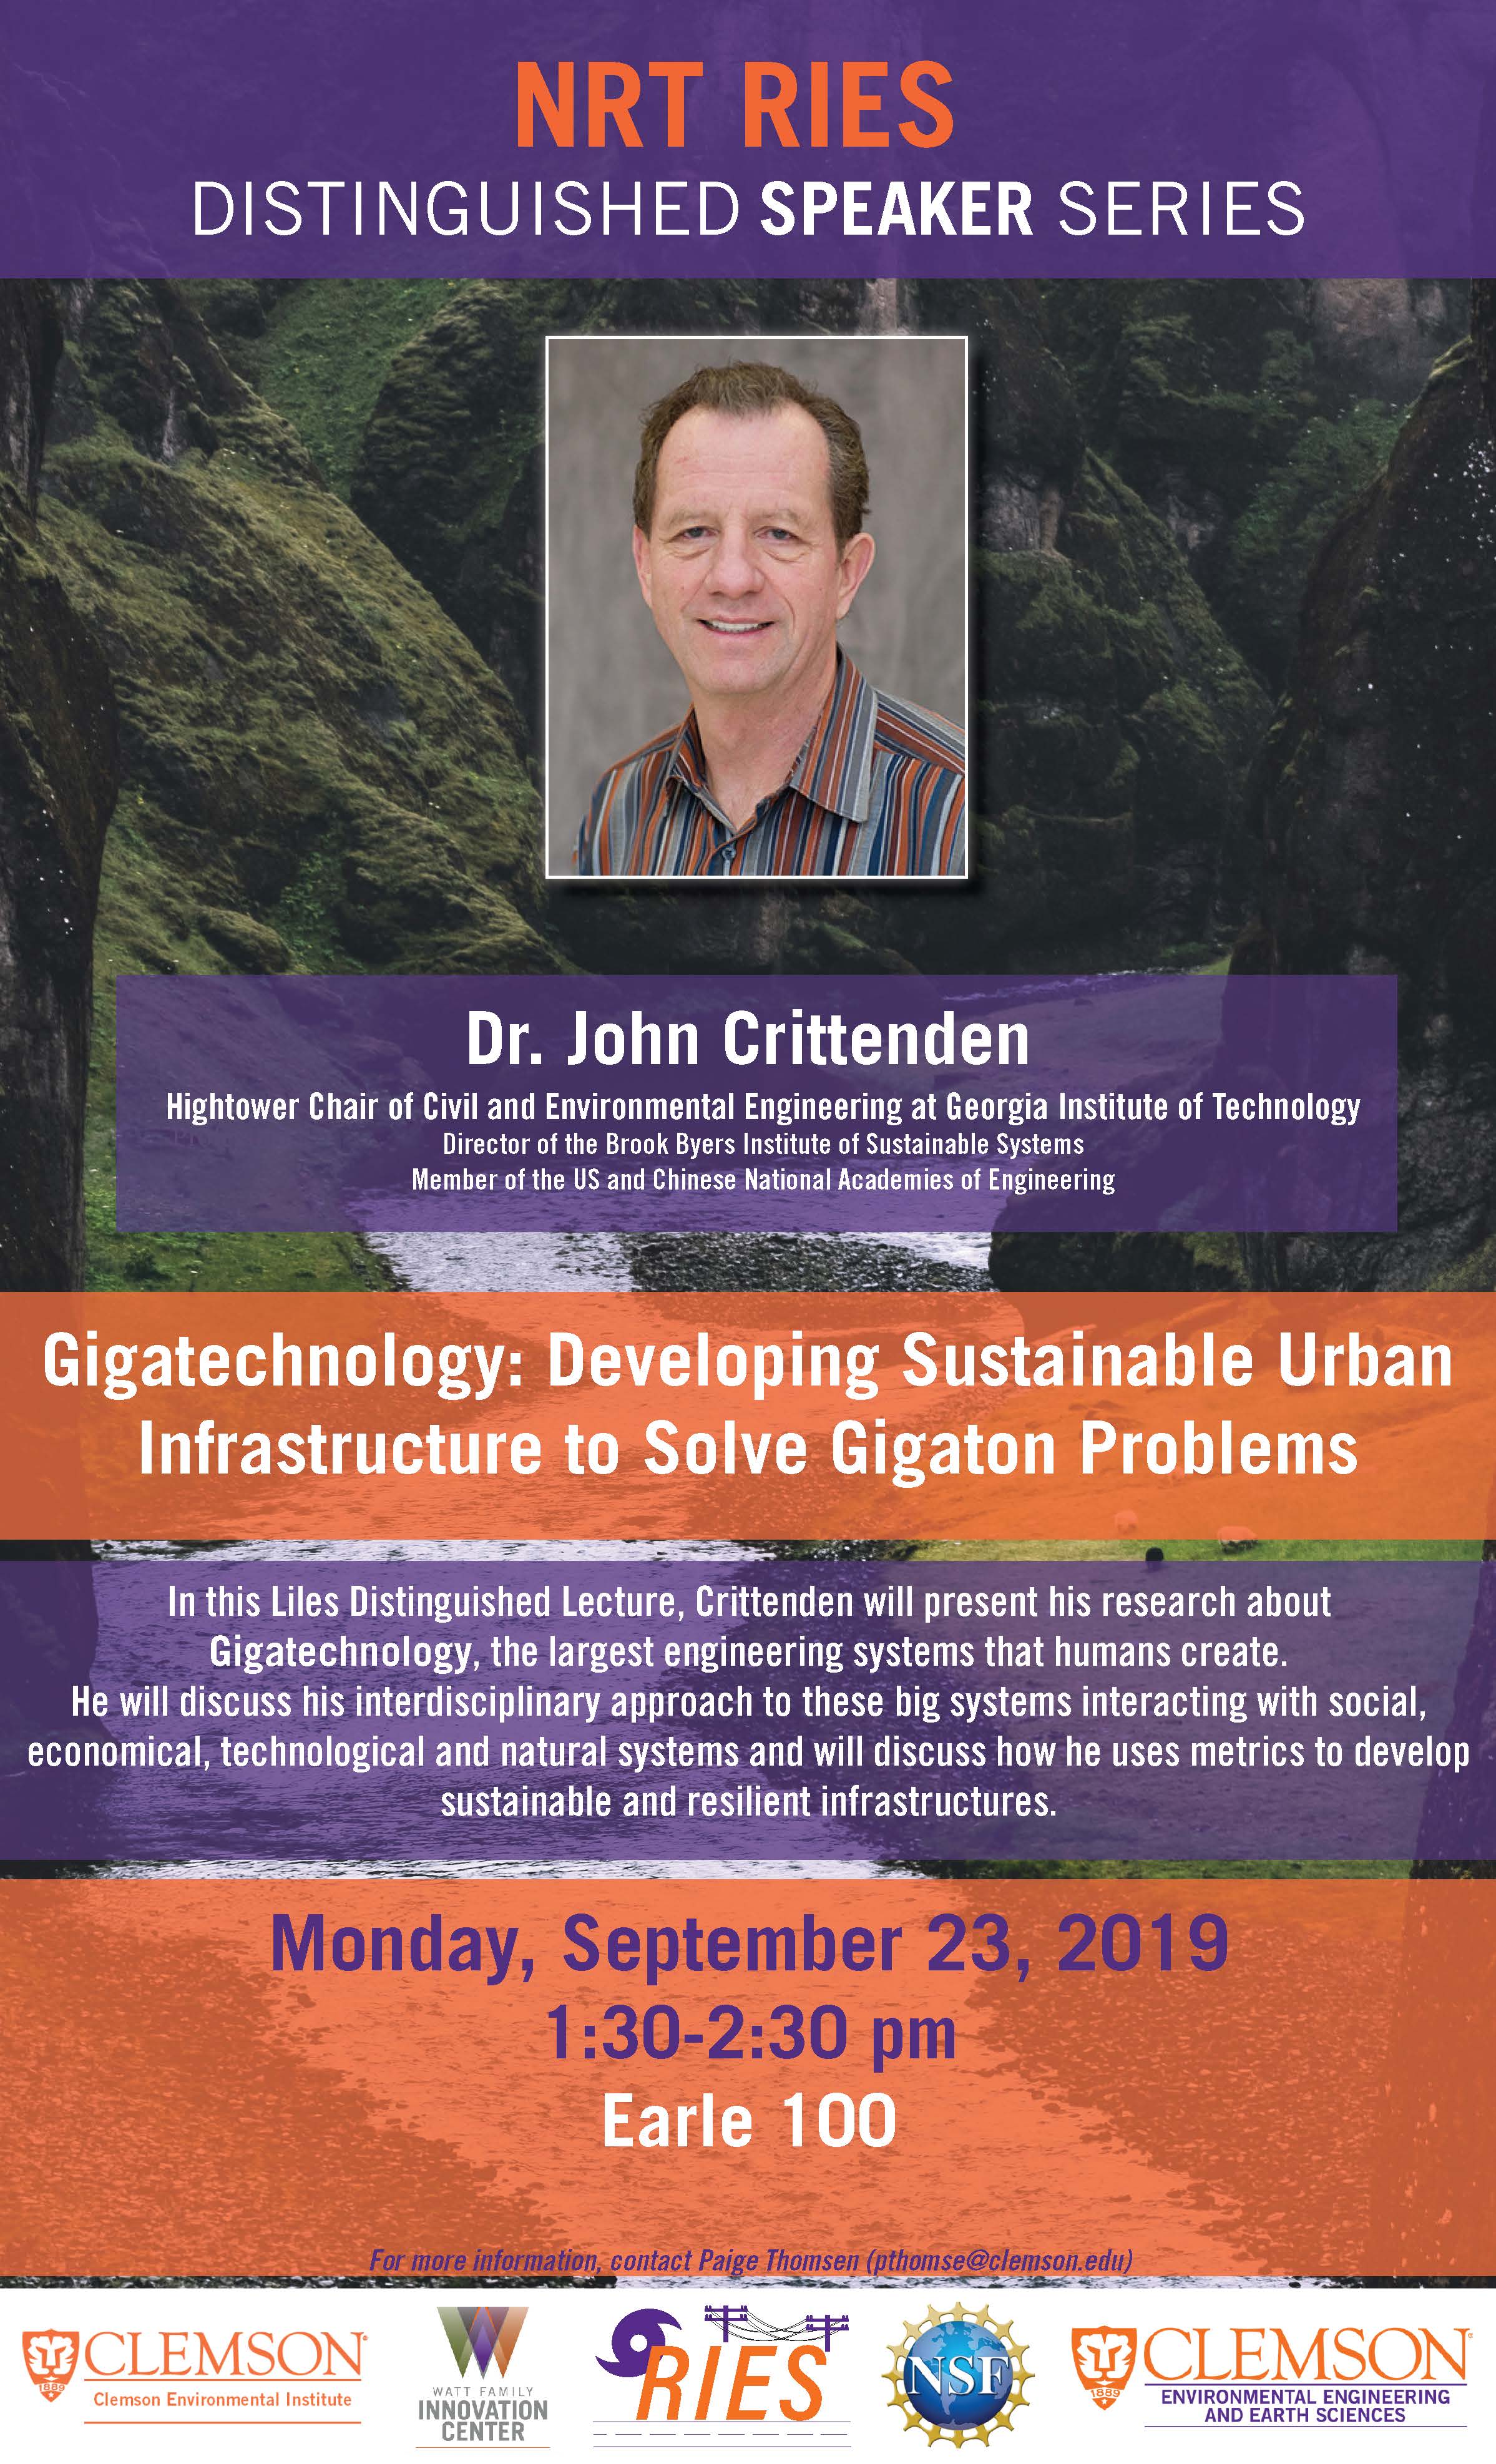 Gigatechnology: Developing Sustainable Urban Infrastructure to Solve Gigaton Problems - Monday, March 4, 2019 1:30-2:45 pm